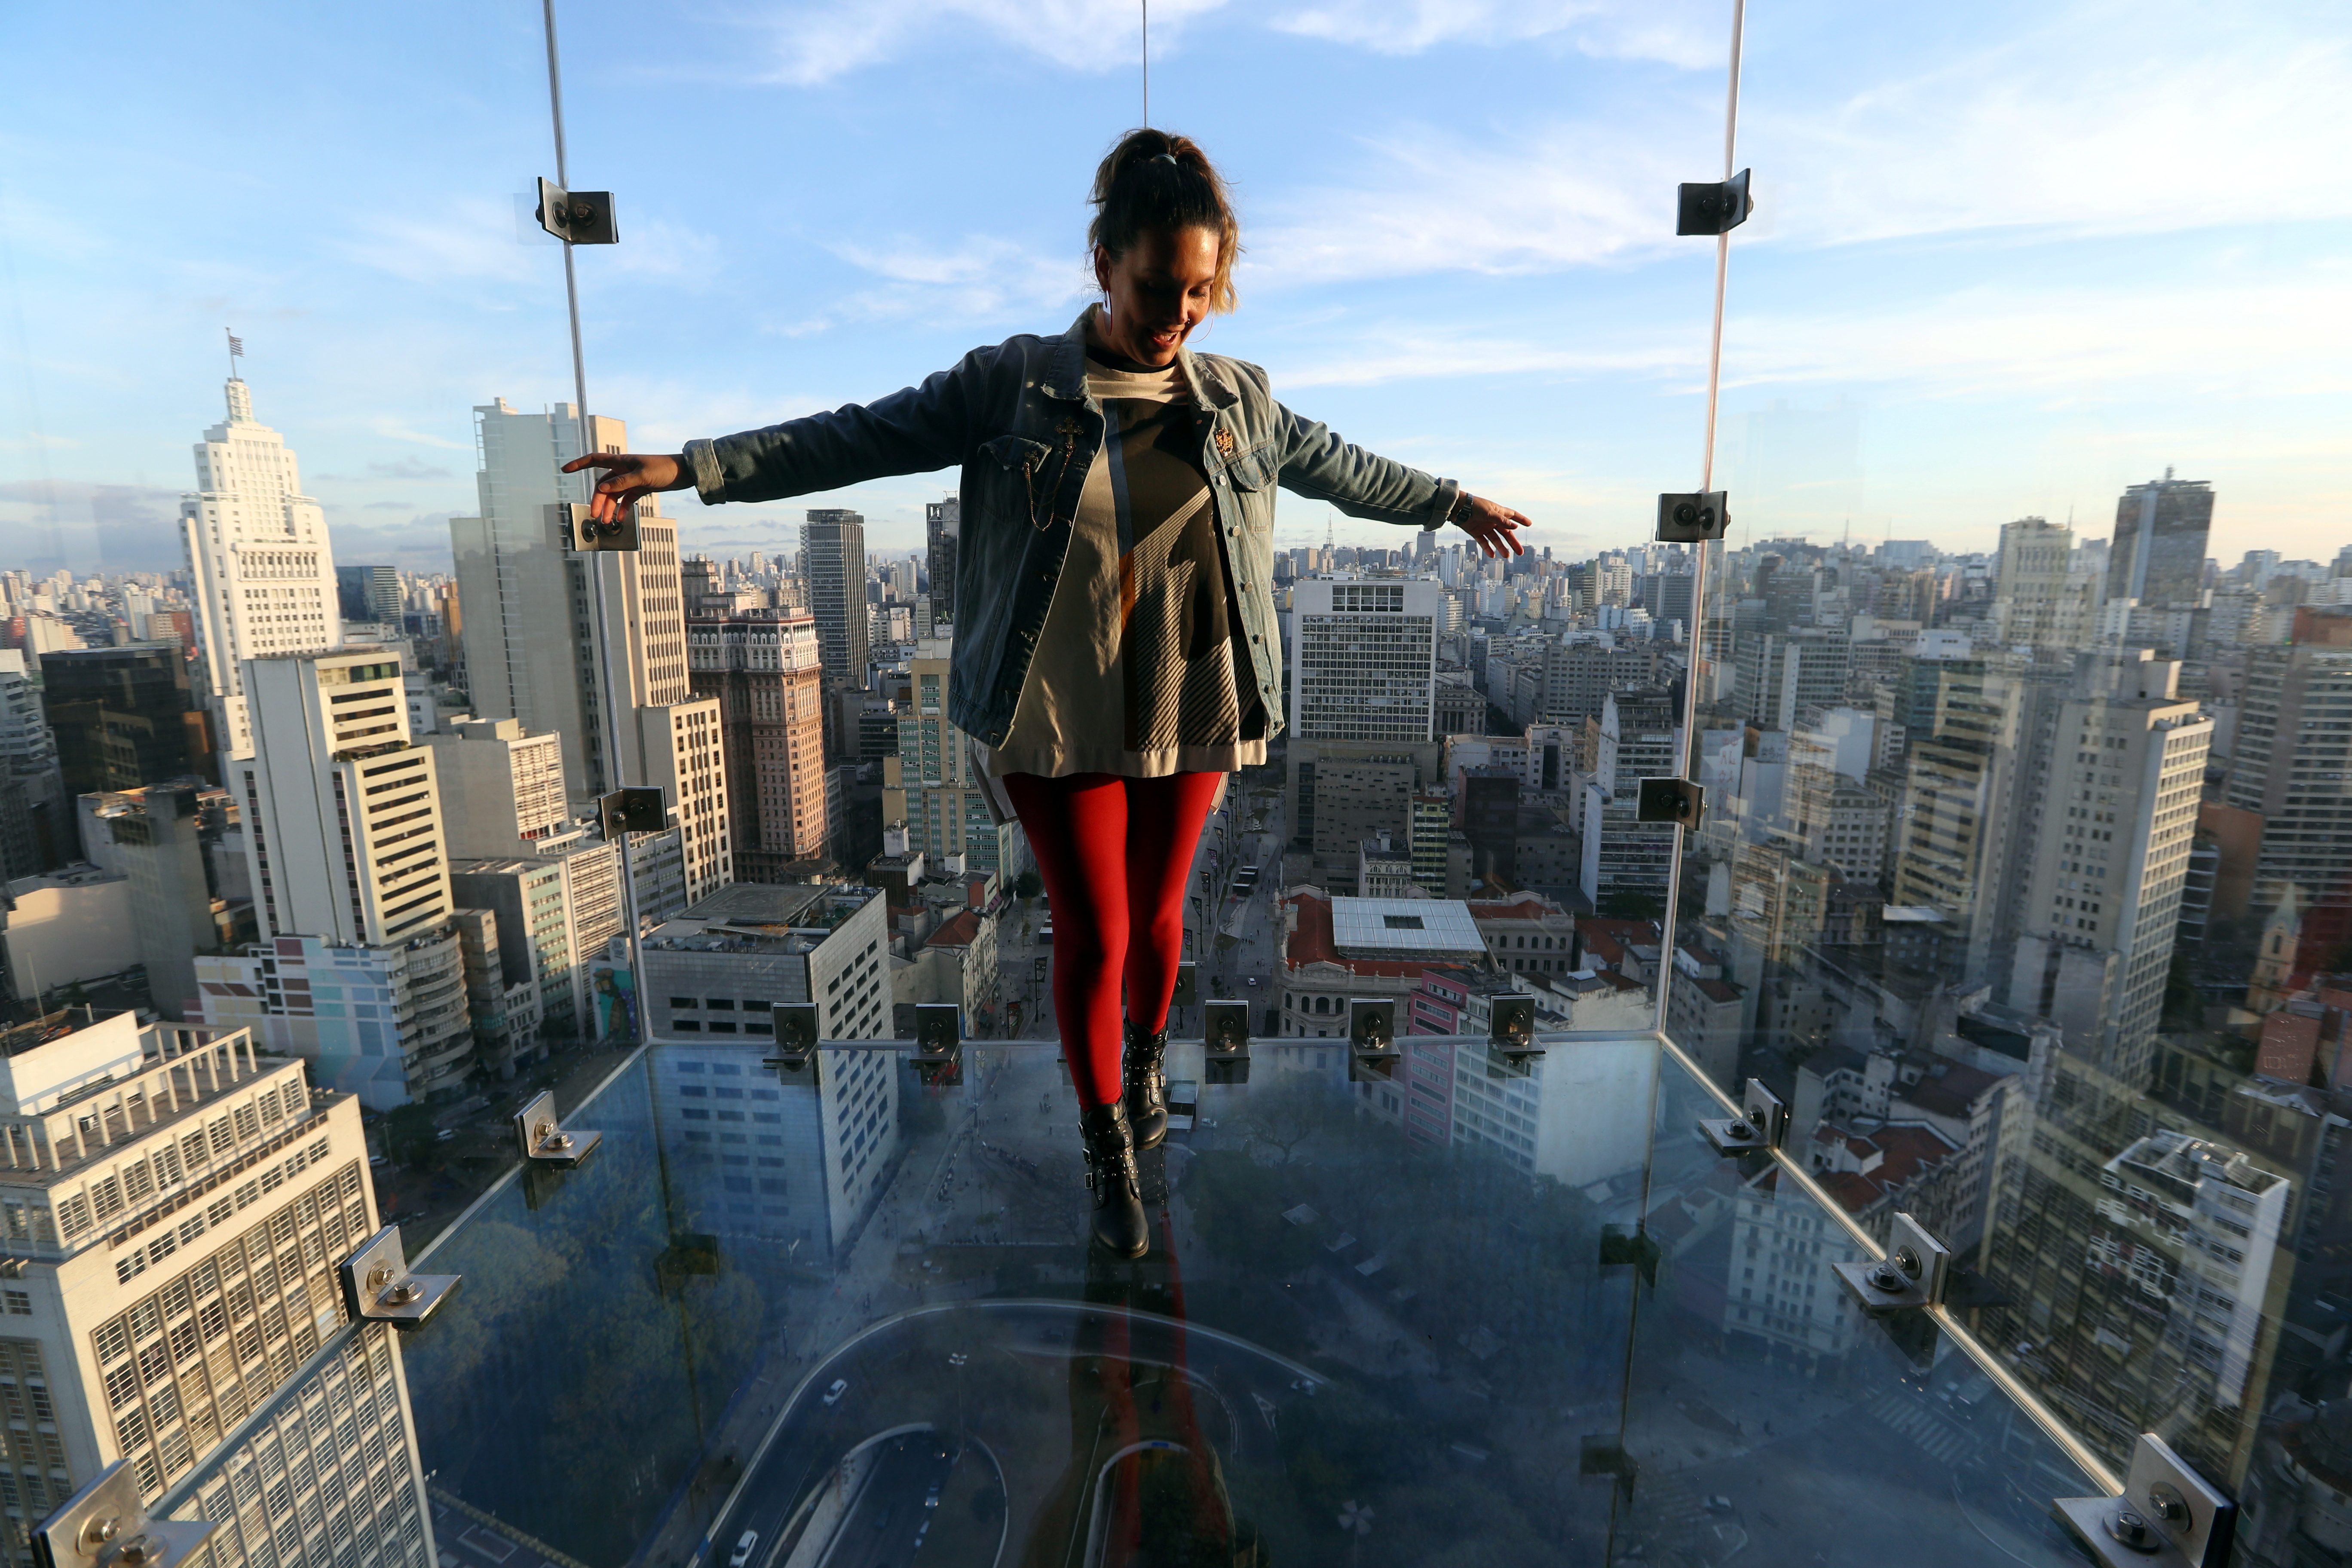 Brazil’s glass box puts fear of heights to the test